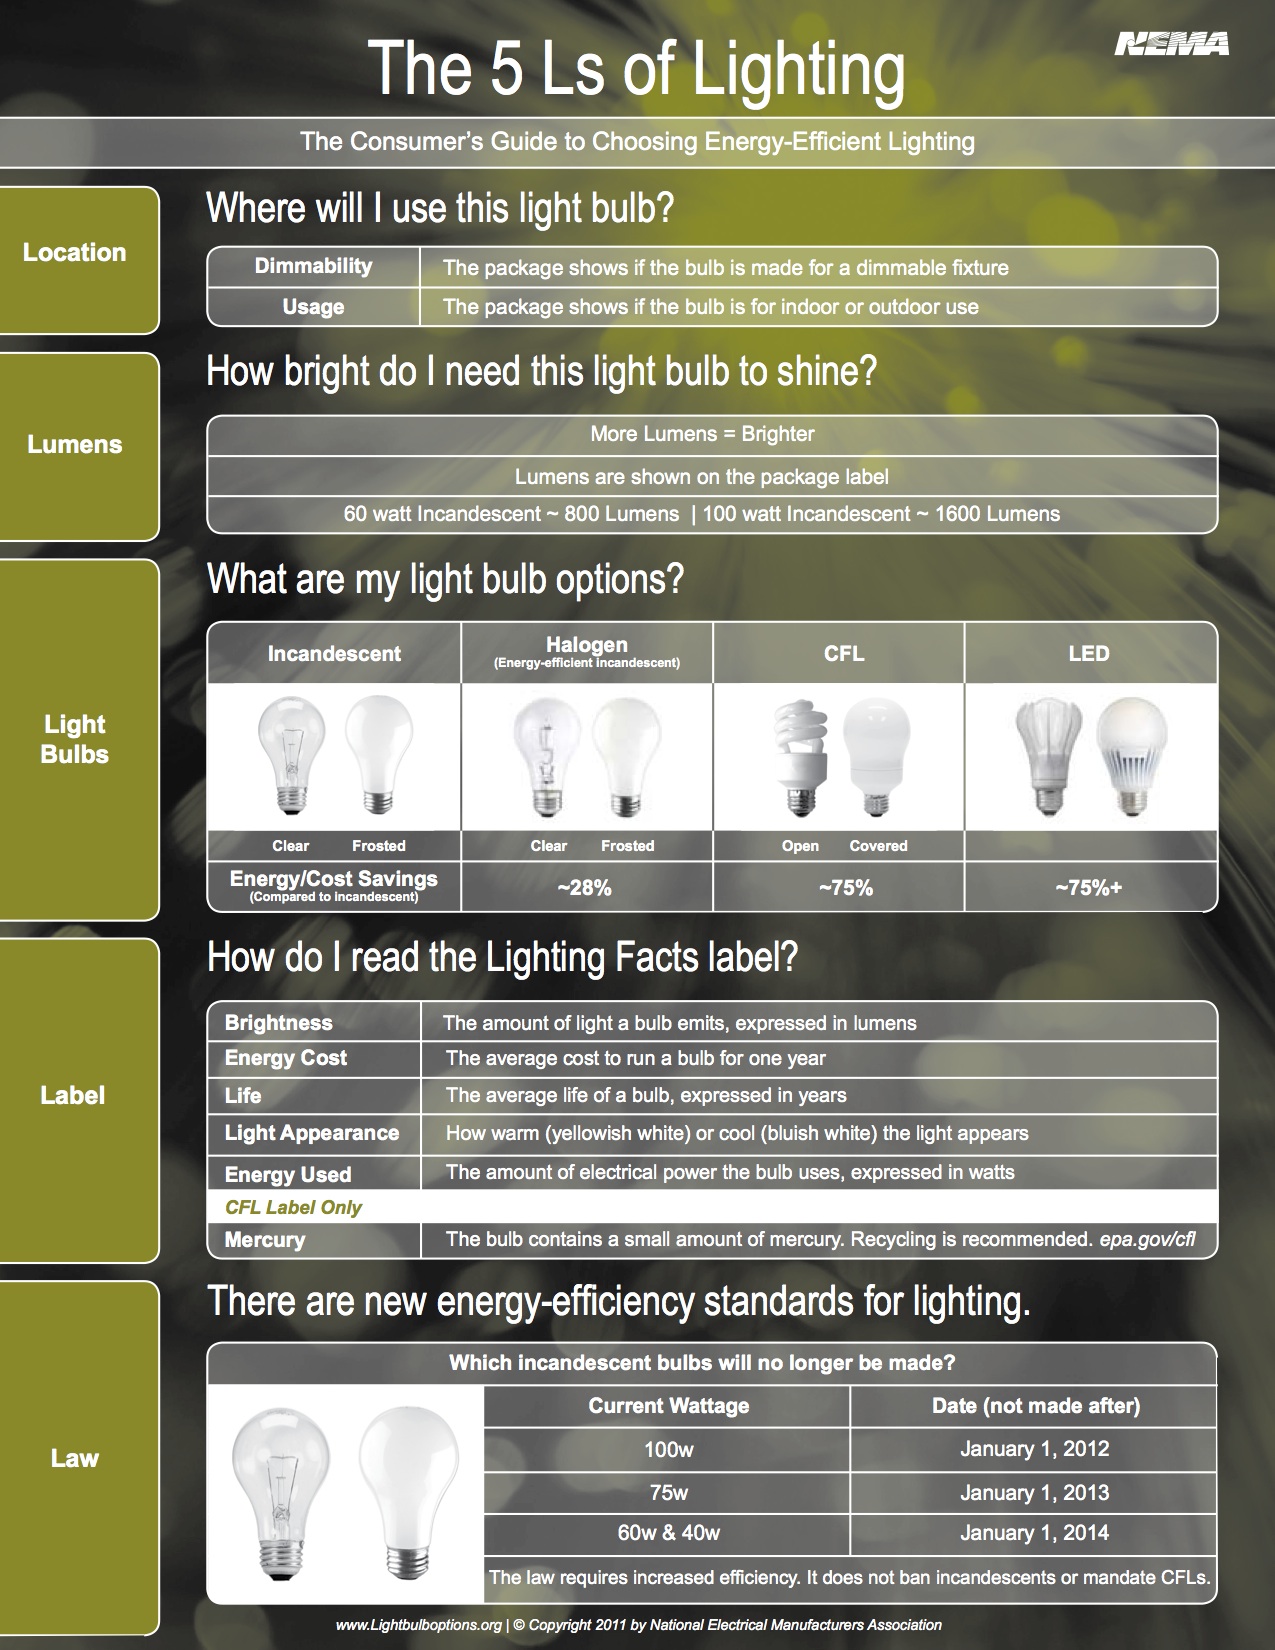 Consumers Guide to Choosing Energy-Efficient Lighting